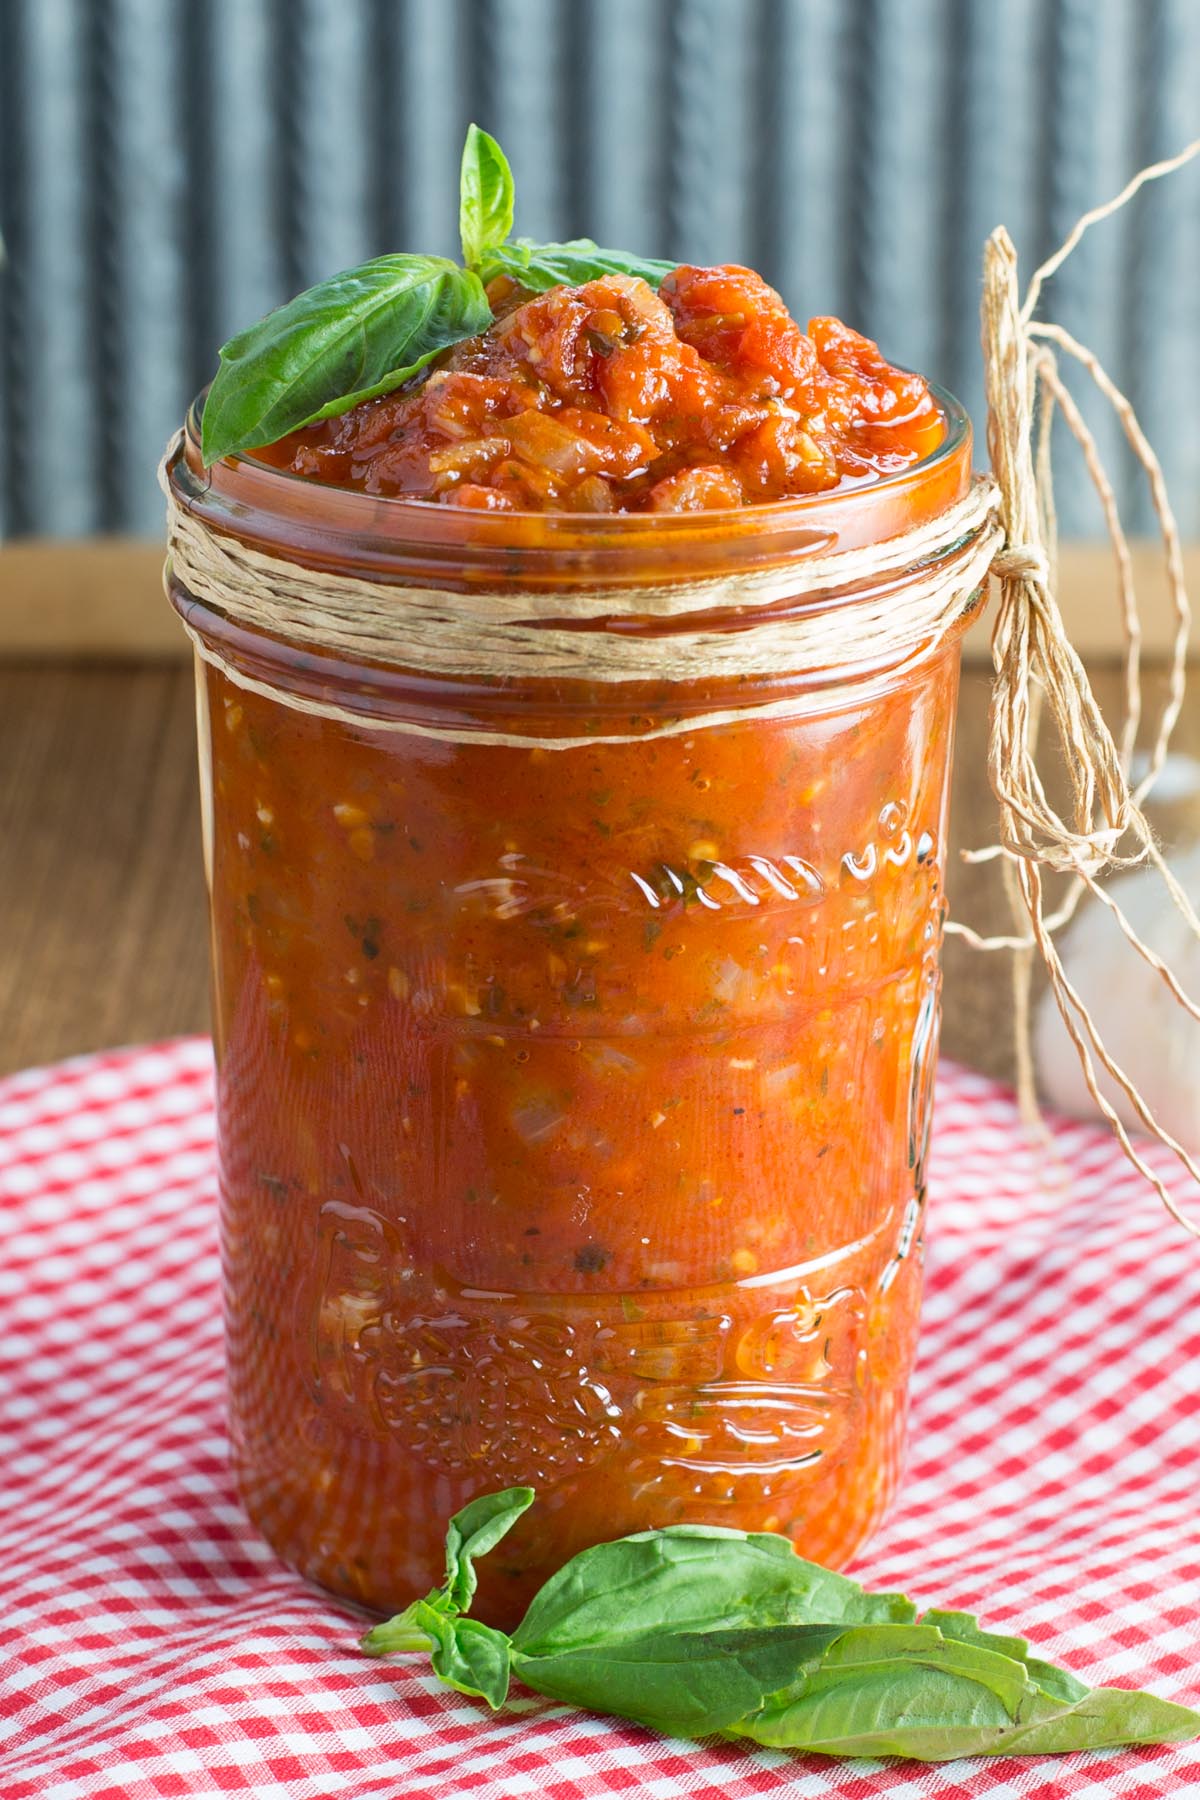 Homemade marinara sauce in glass jar decorated with basil leaves.